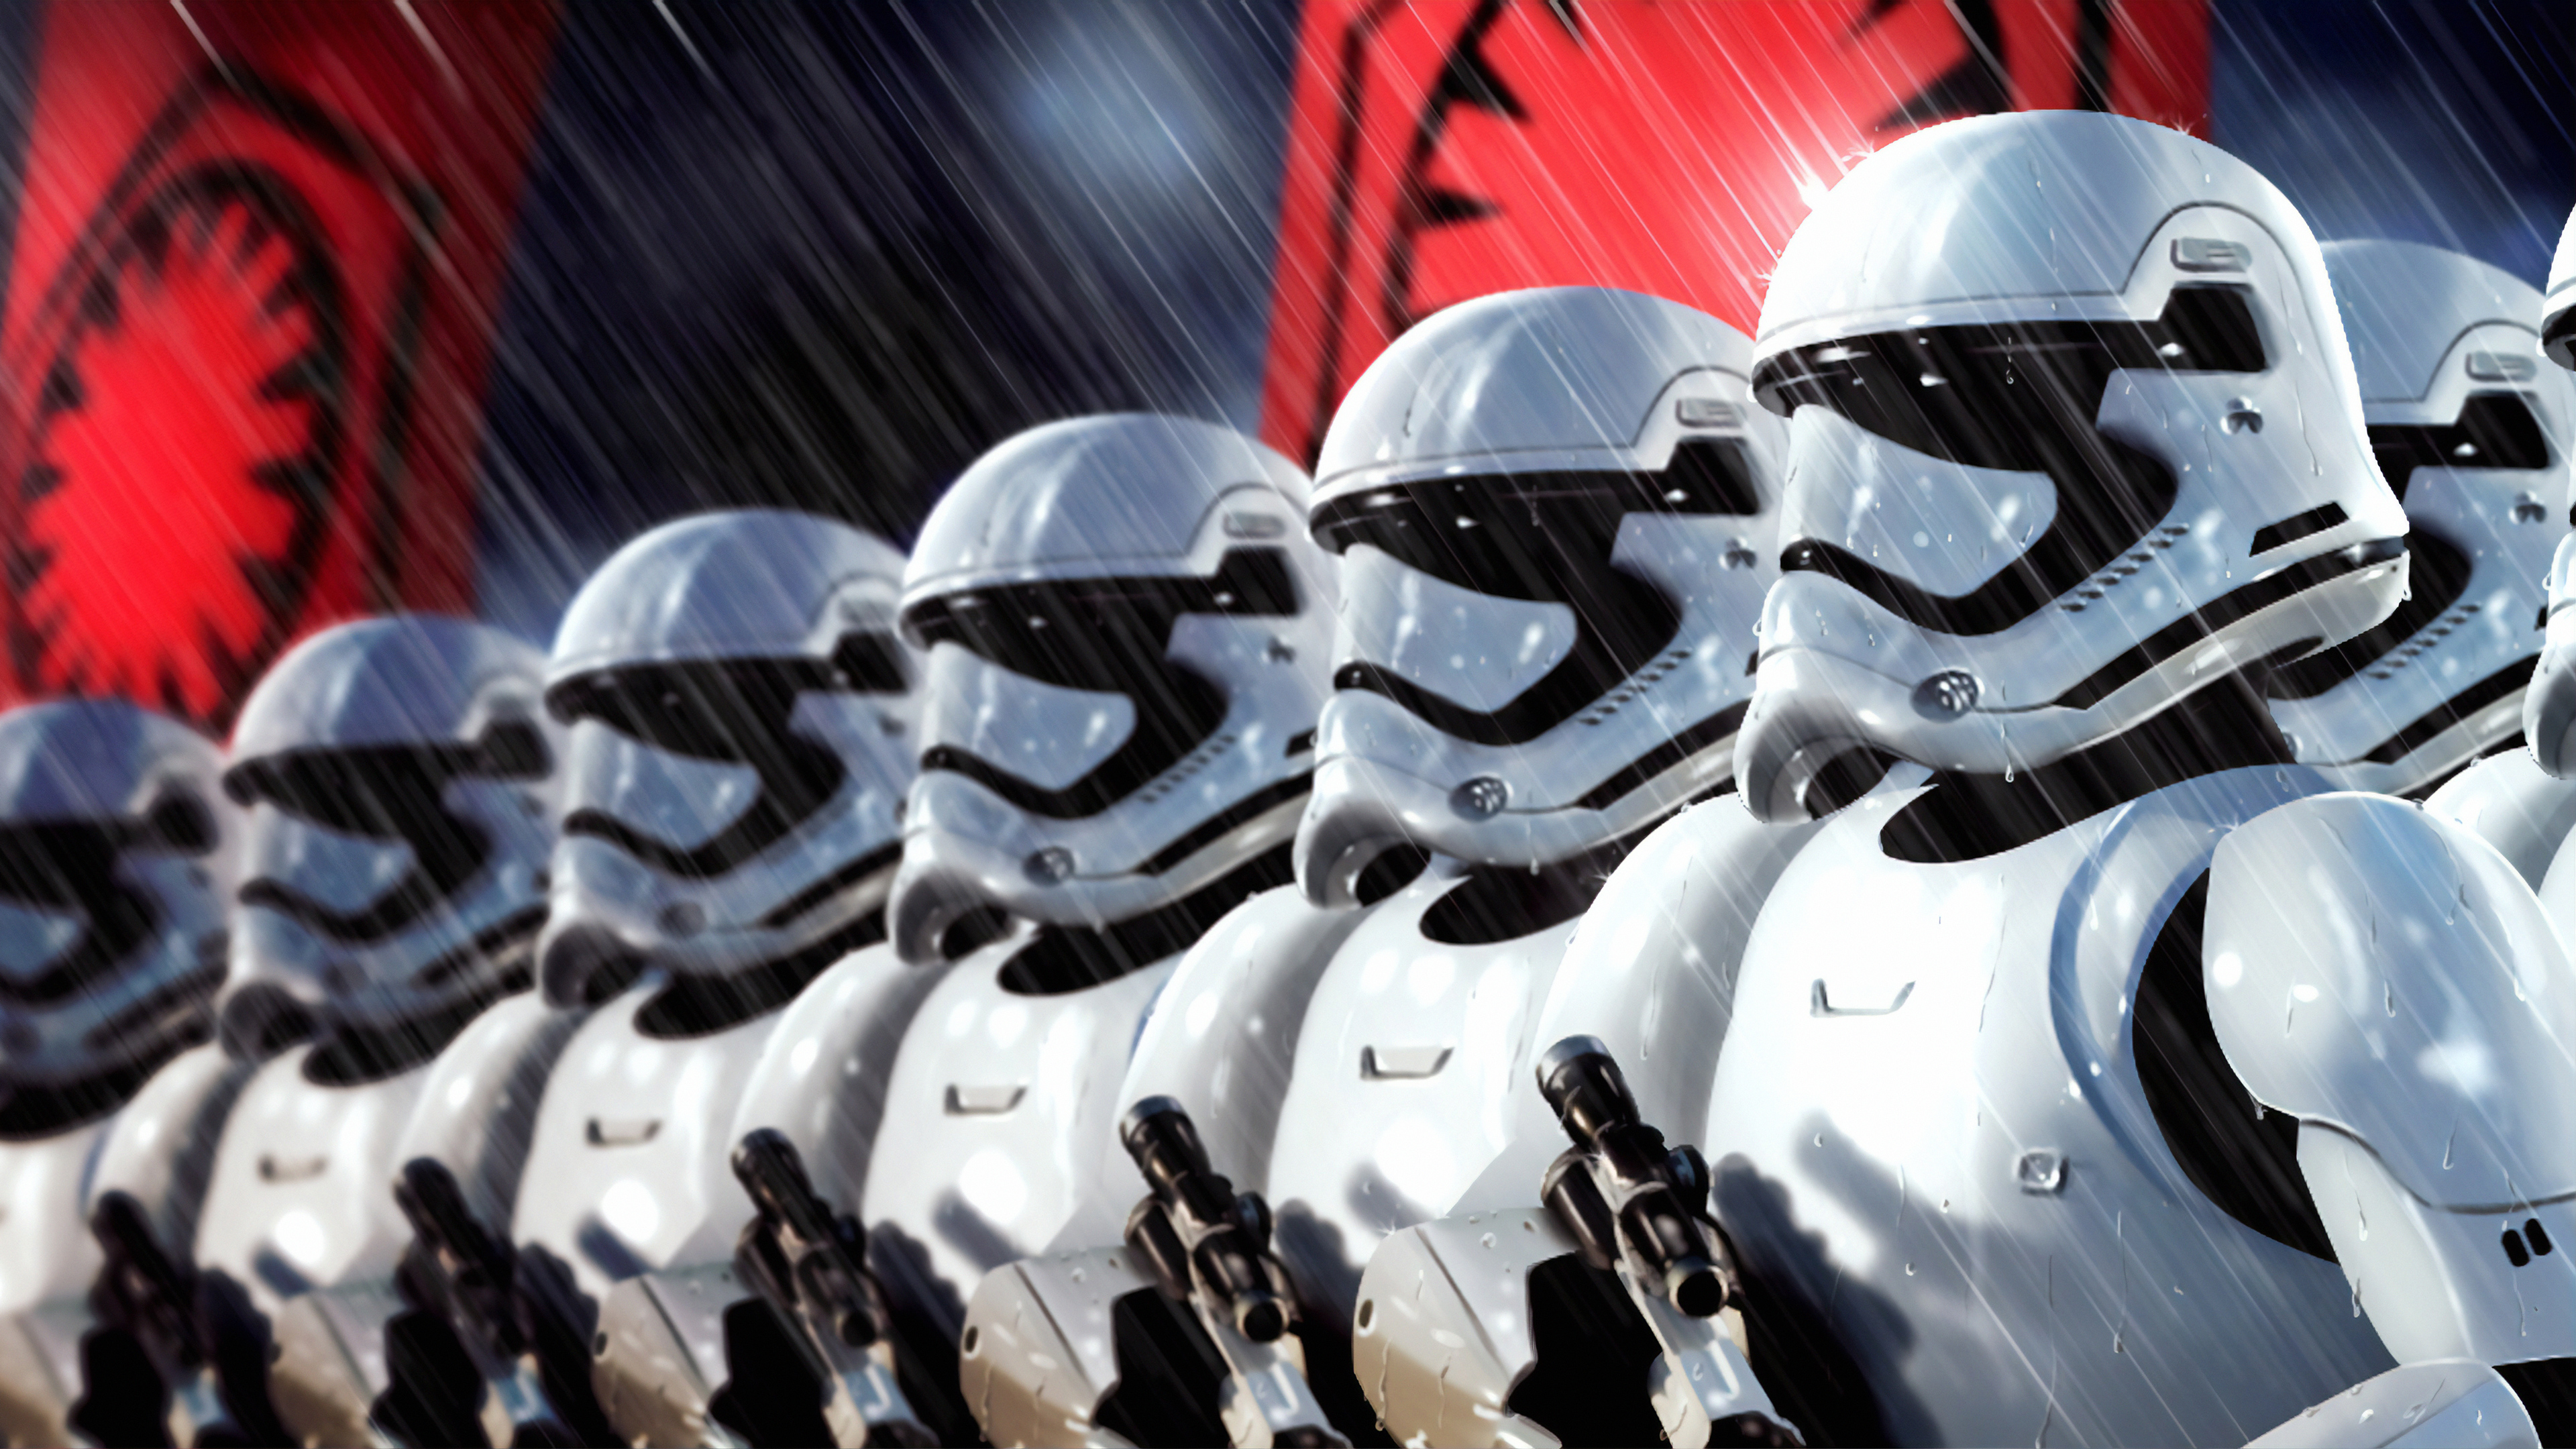 Ultra Hd Stormtrooper Wallpaper 4K That Means The Wallpapers At This